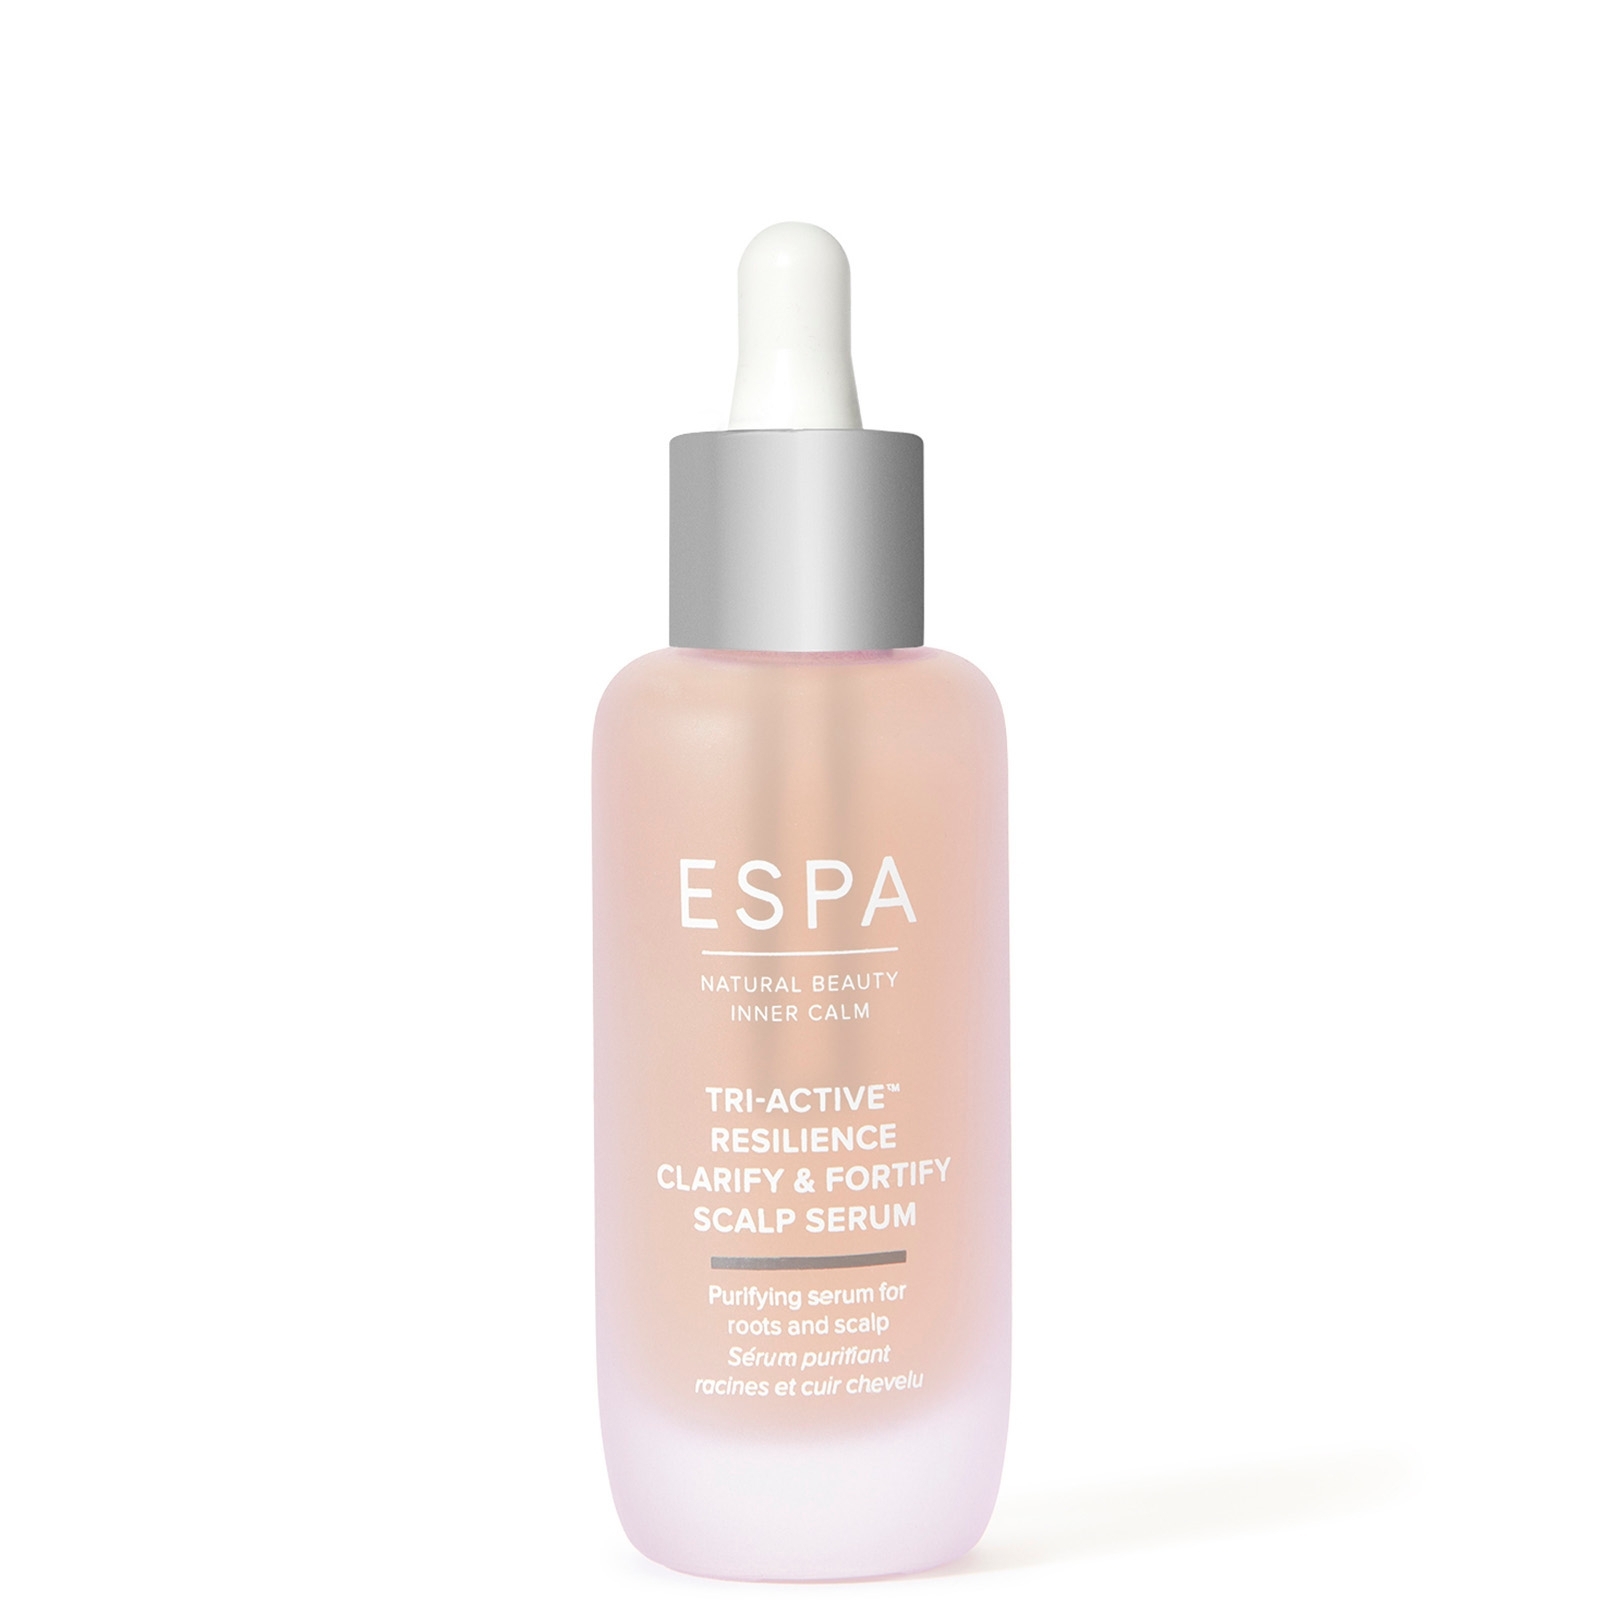 Image of ESPA Tri-Active Resilience Clarify & Fortify Scalp Siero